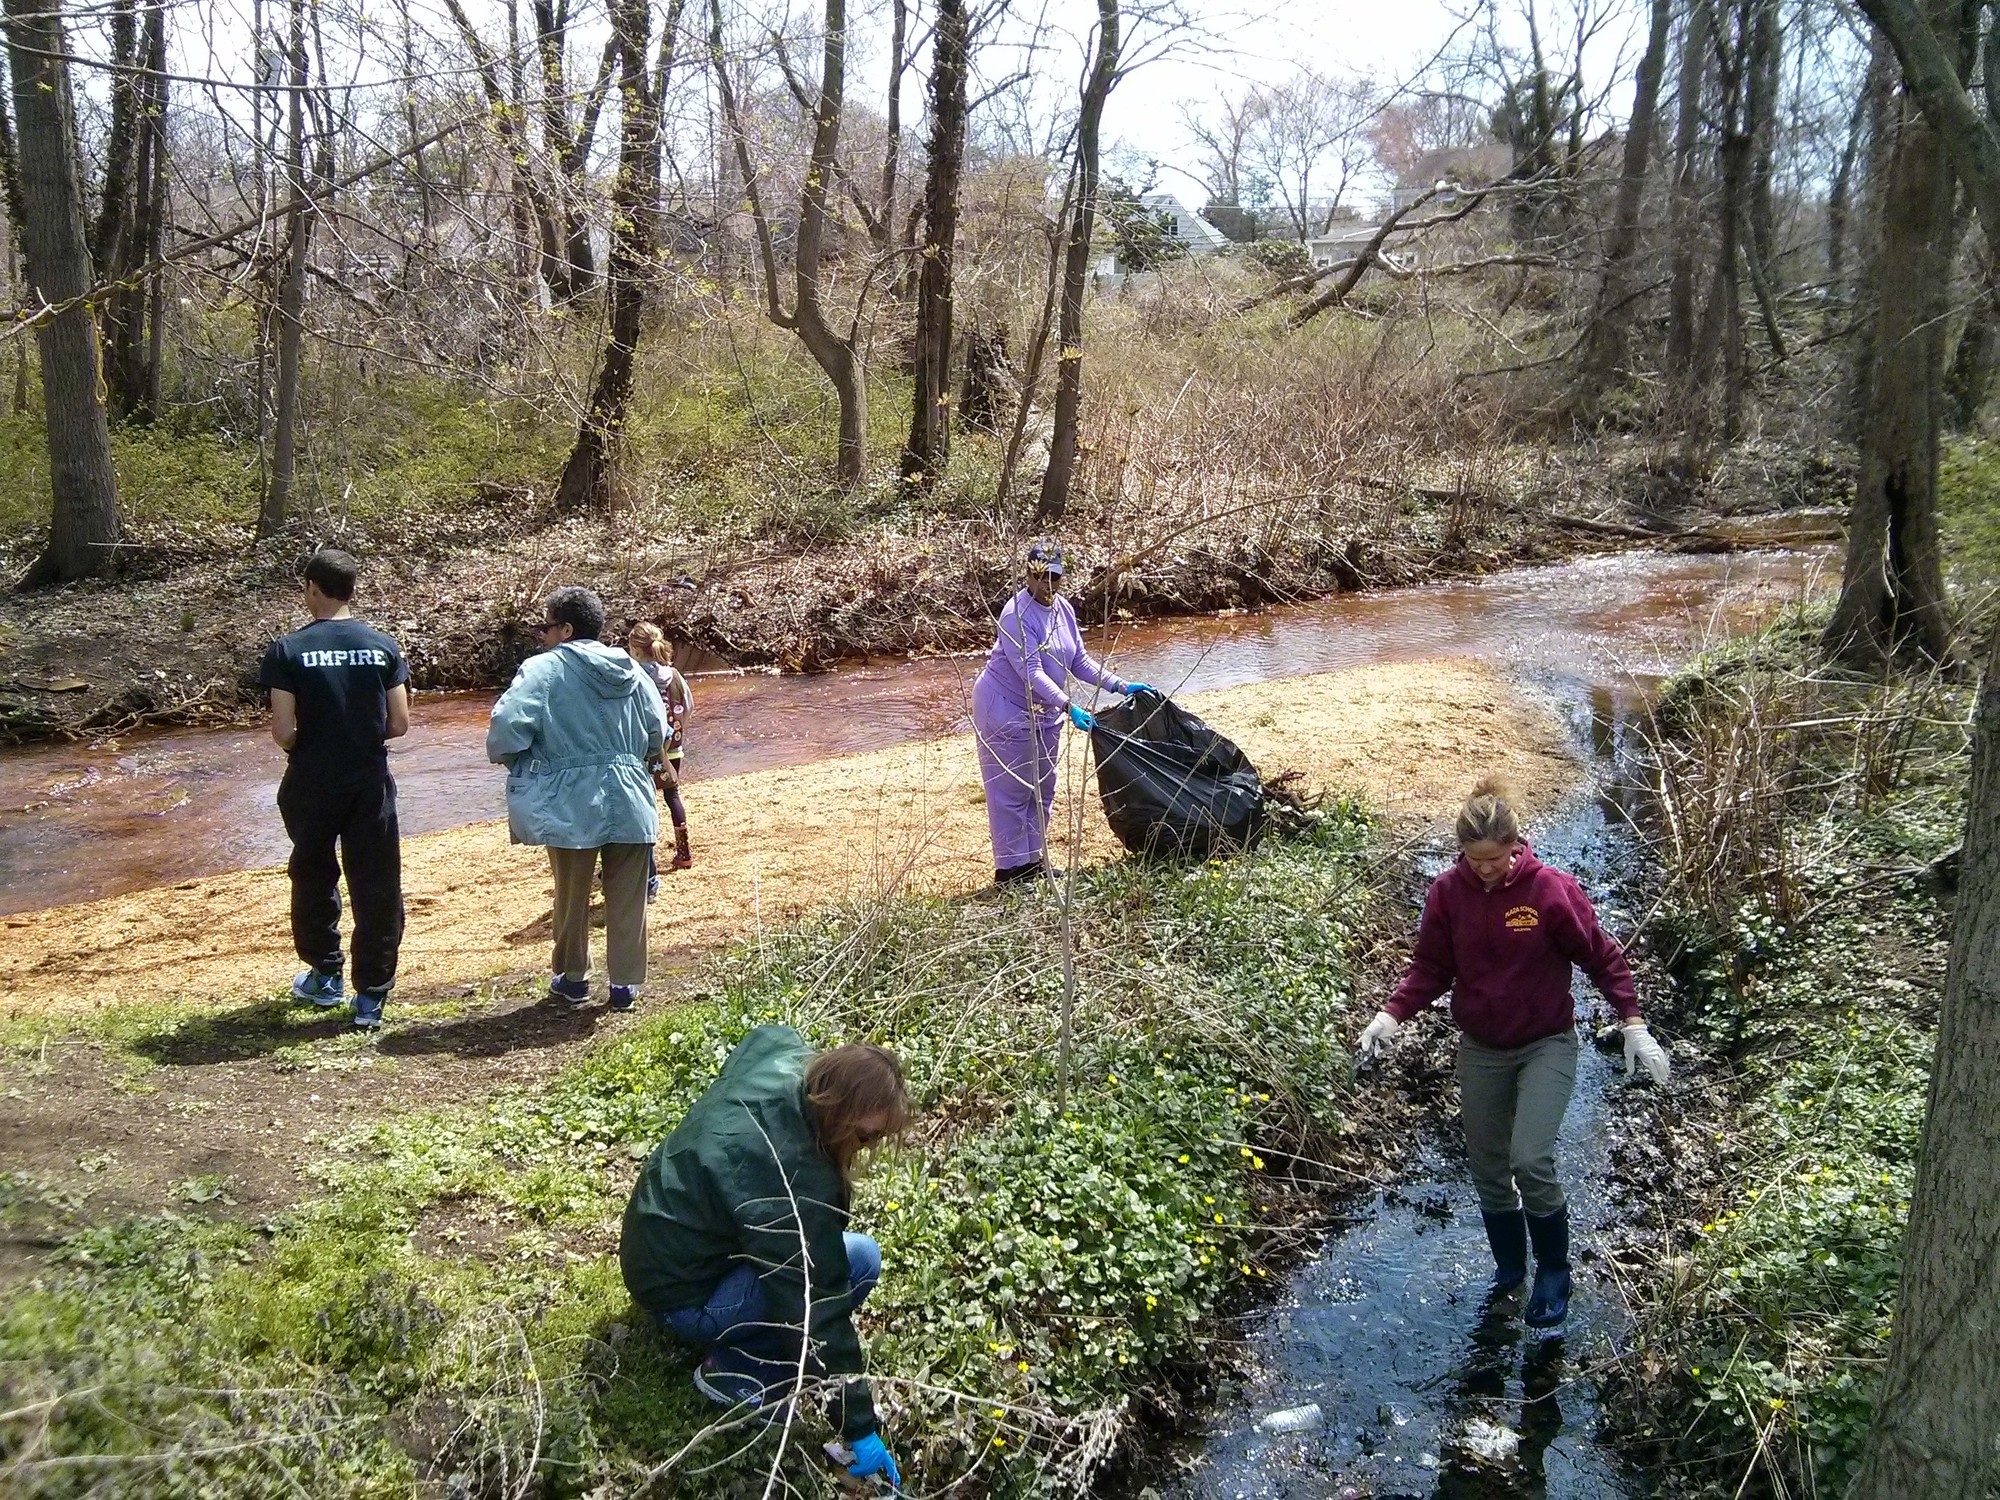 About 40 volunteers came out last Sunday to pick up litter at the Brookside Preserve in Baldwin and Freeport.